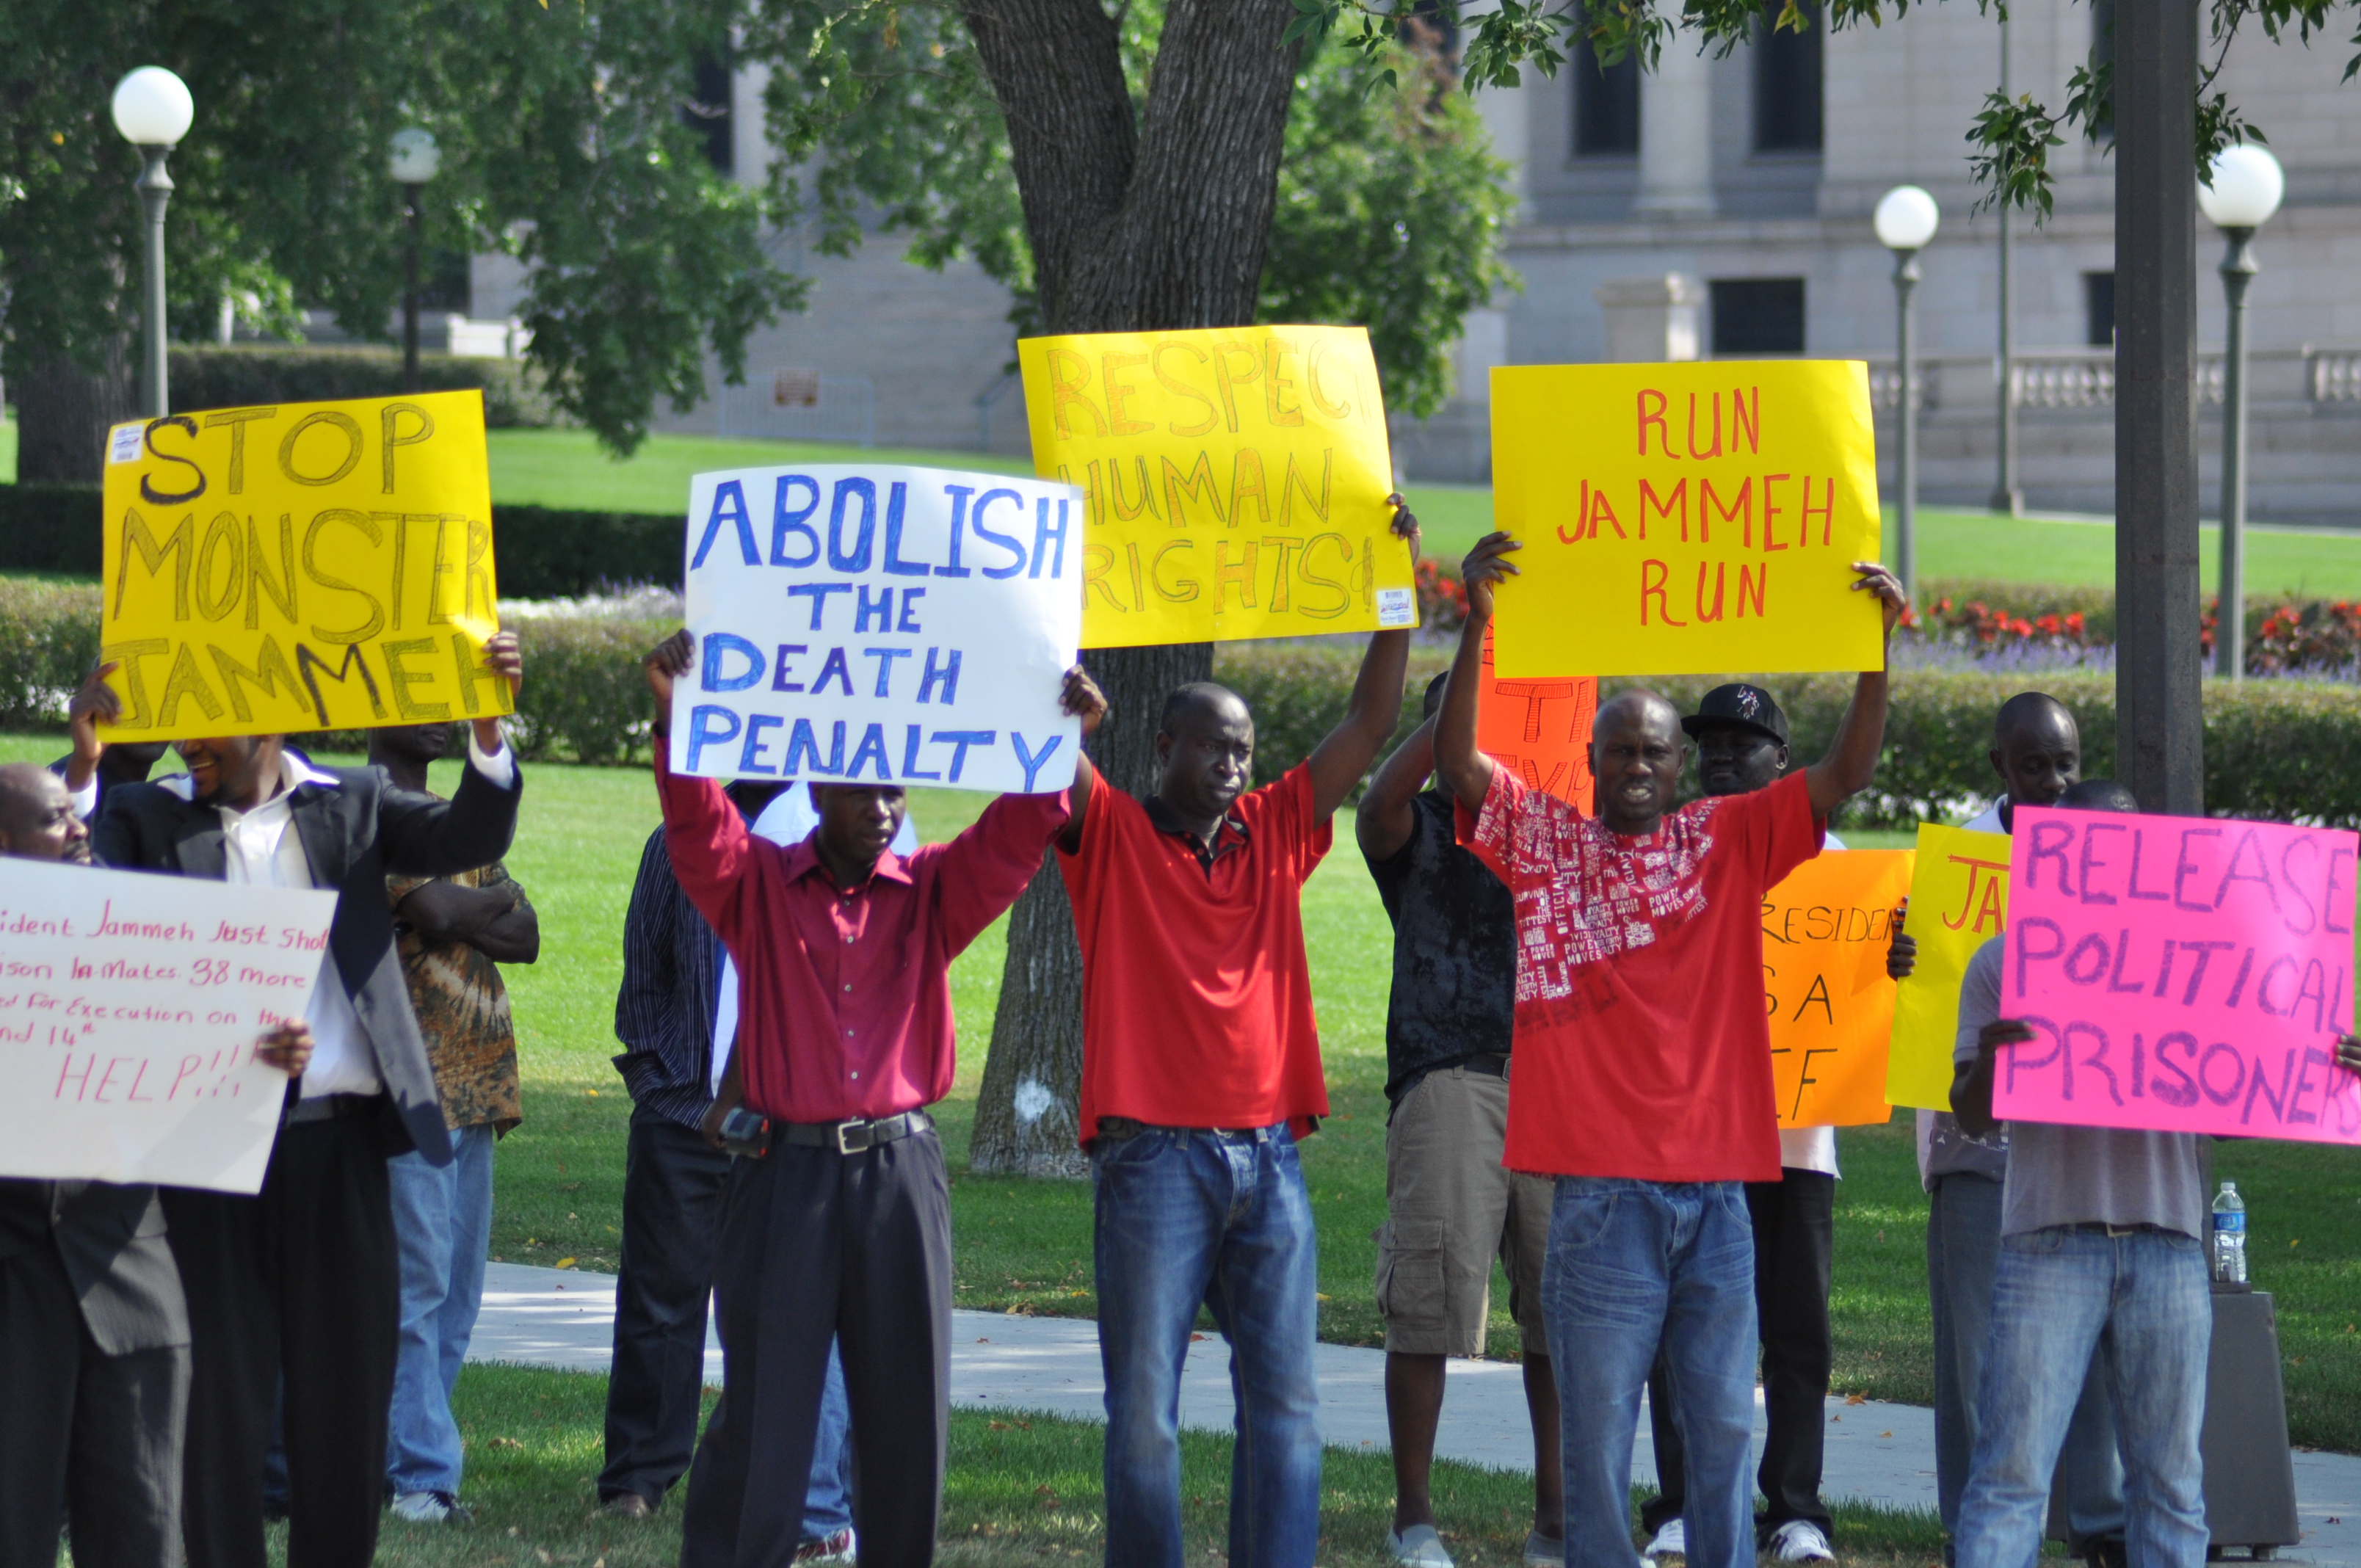 Group of people holding protest signs advocating for human rights and the abolition of the death penalty outdoors.